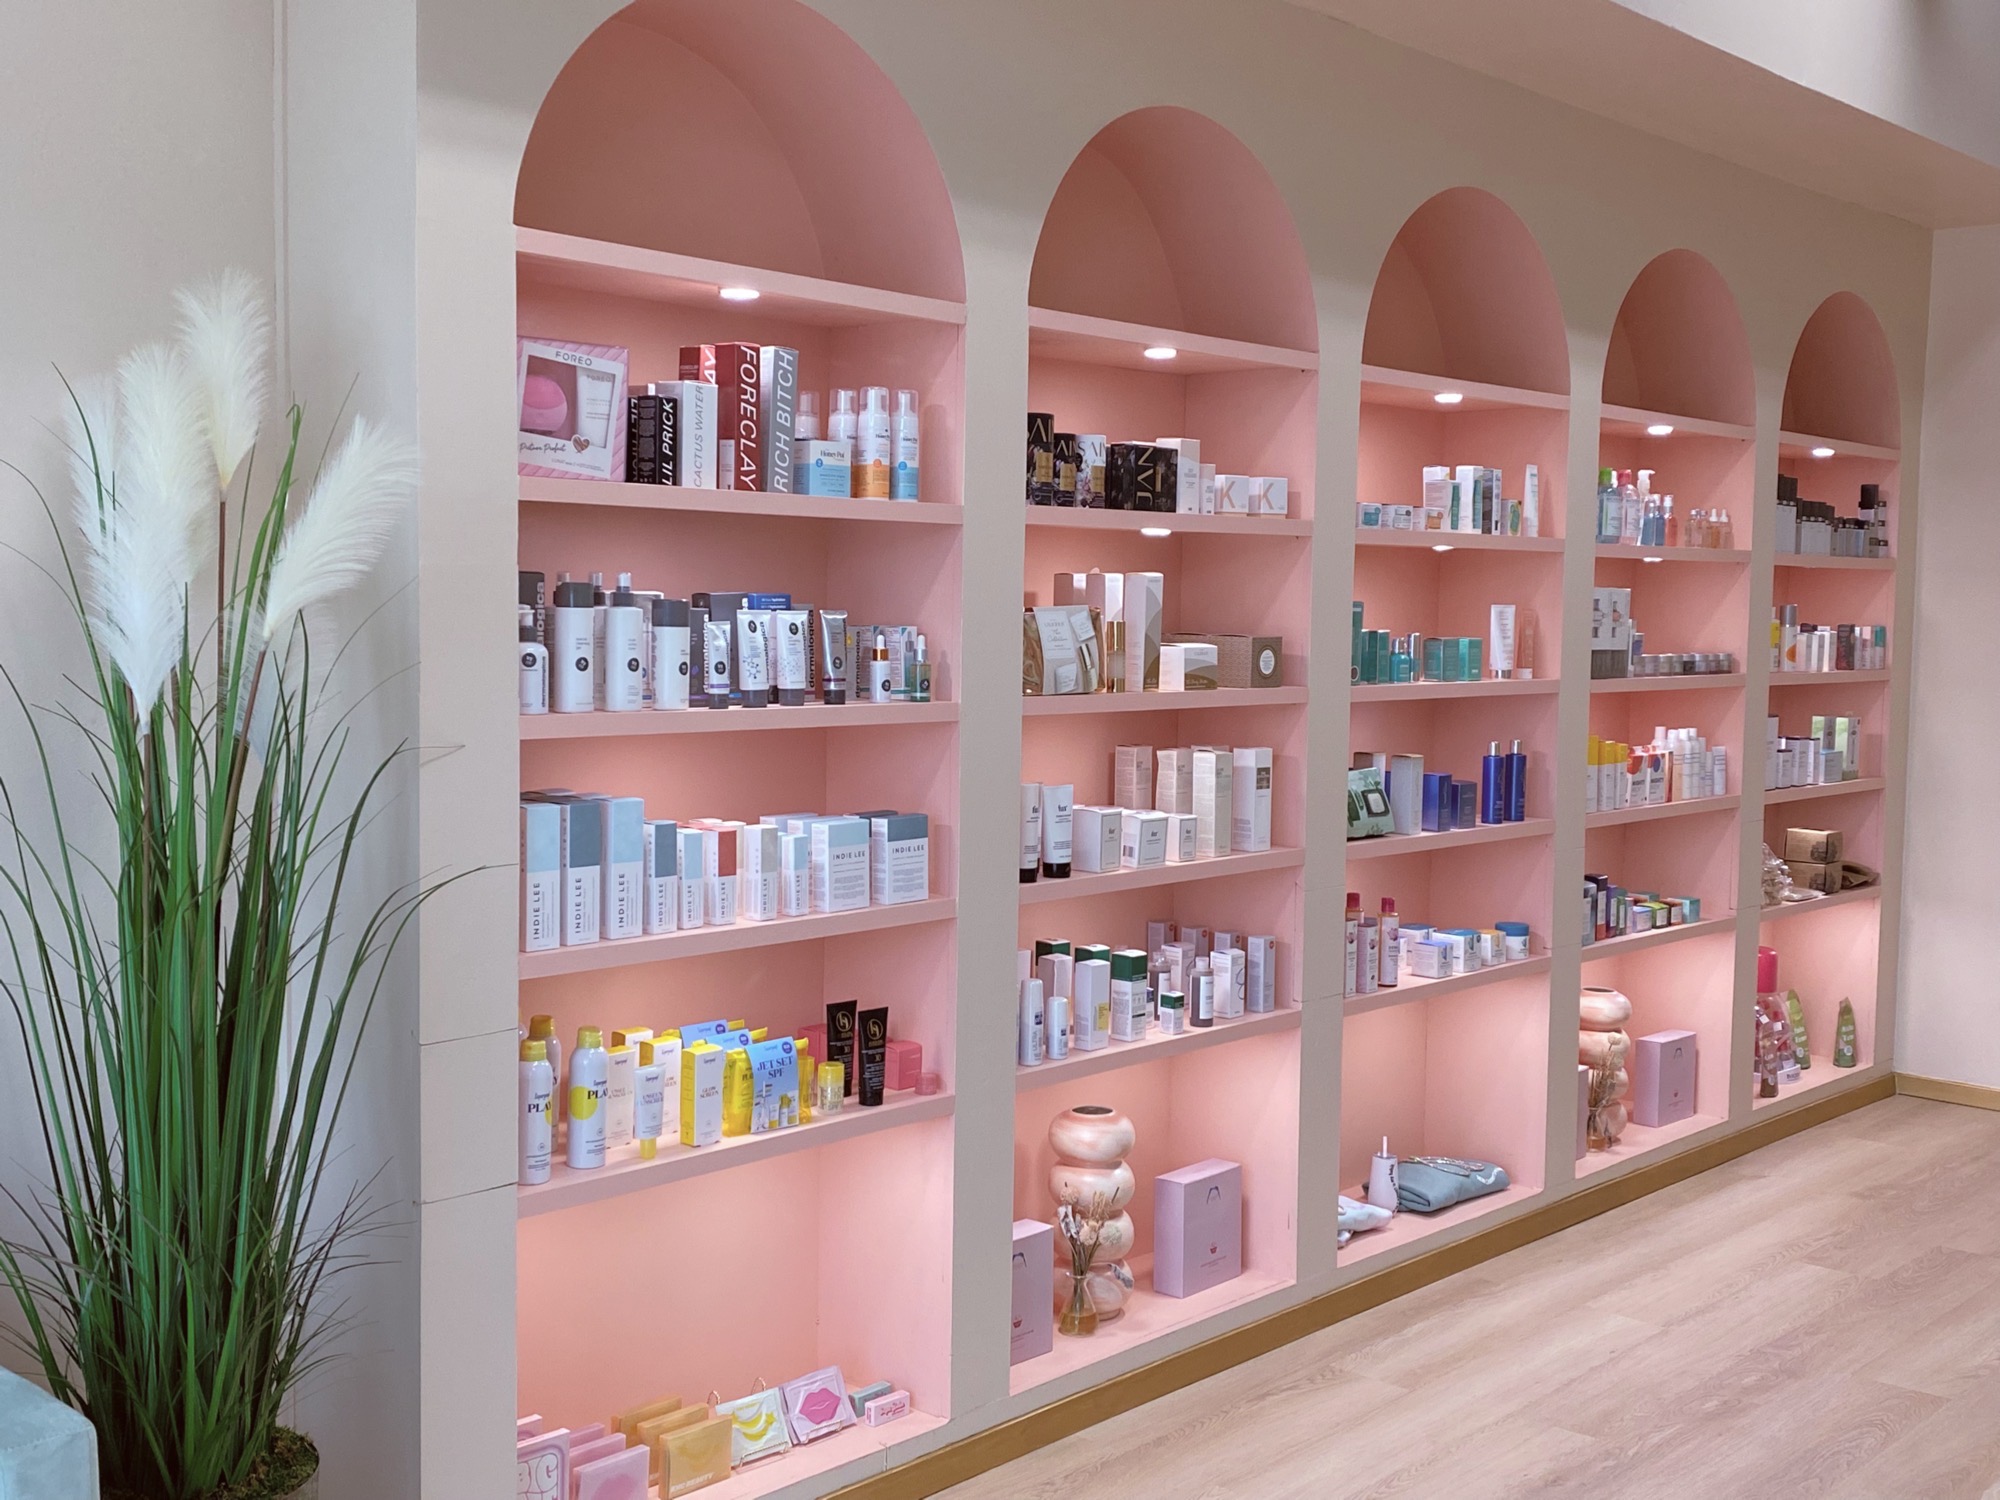 SKIN CABINET Launches a New Spa and Storefront